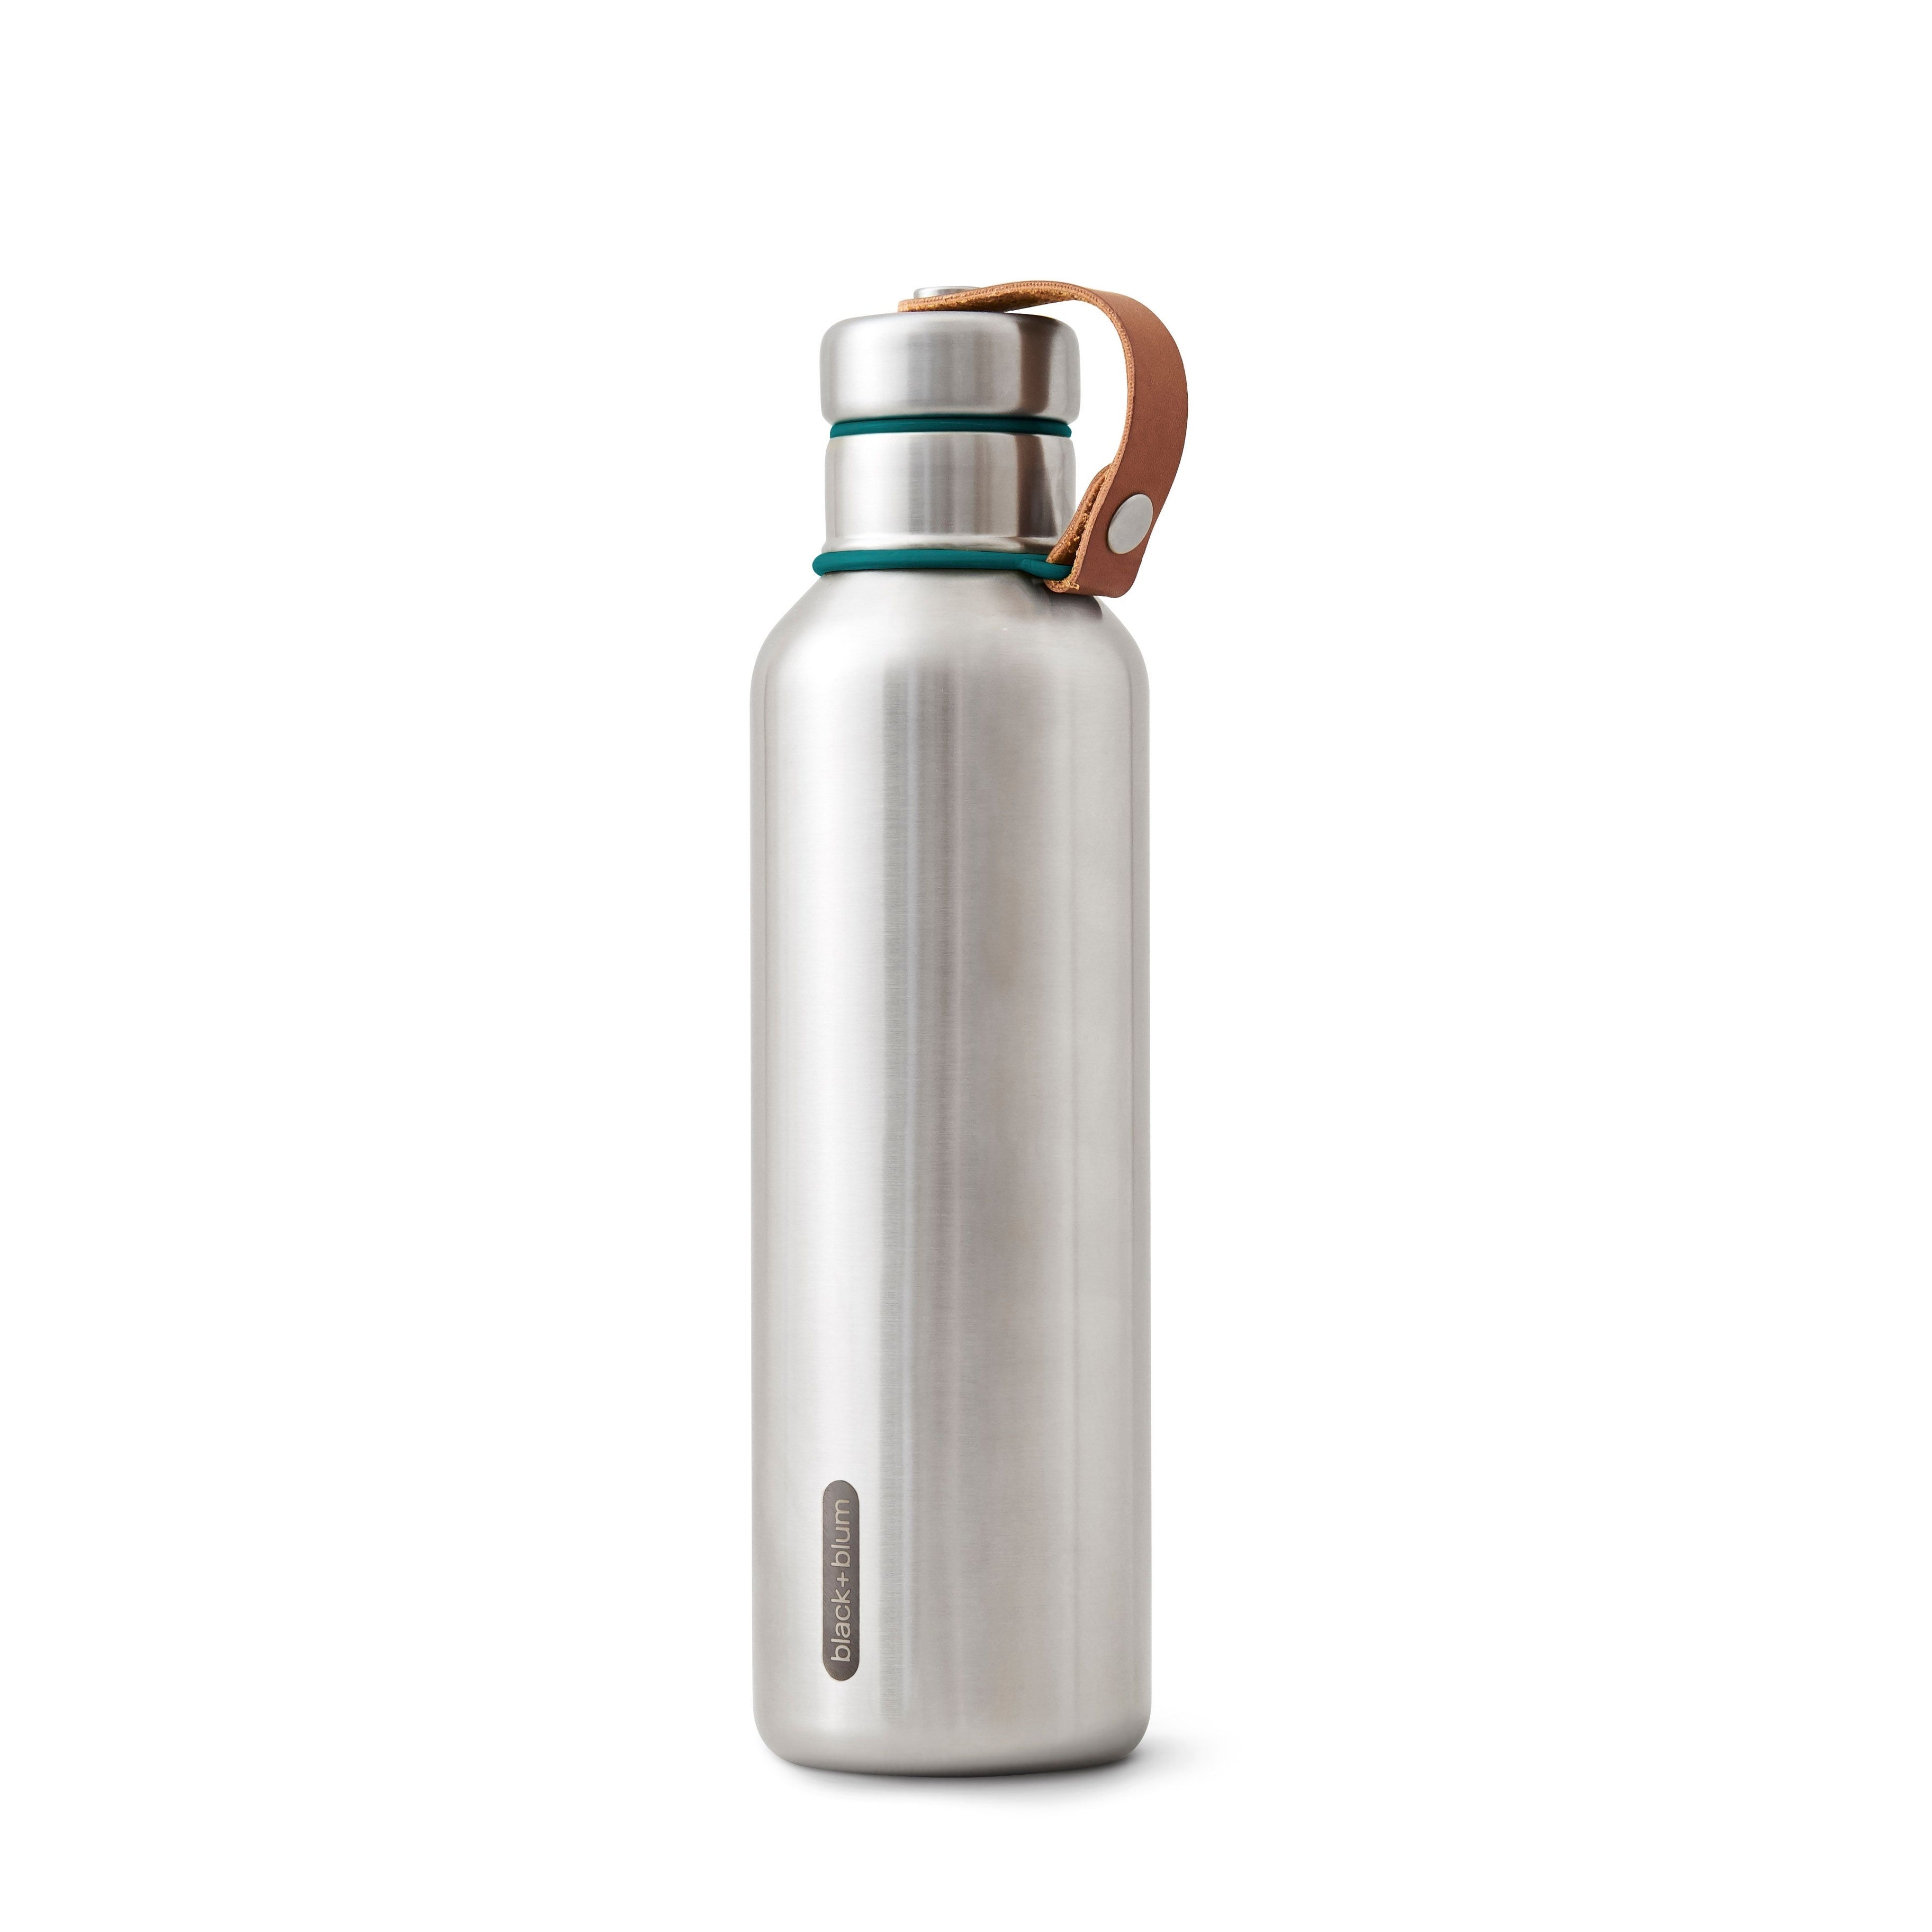 Thermos Vacuum Insulated Compact Beverage Bottle - 16 oz. - Silver/Black